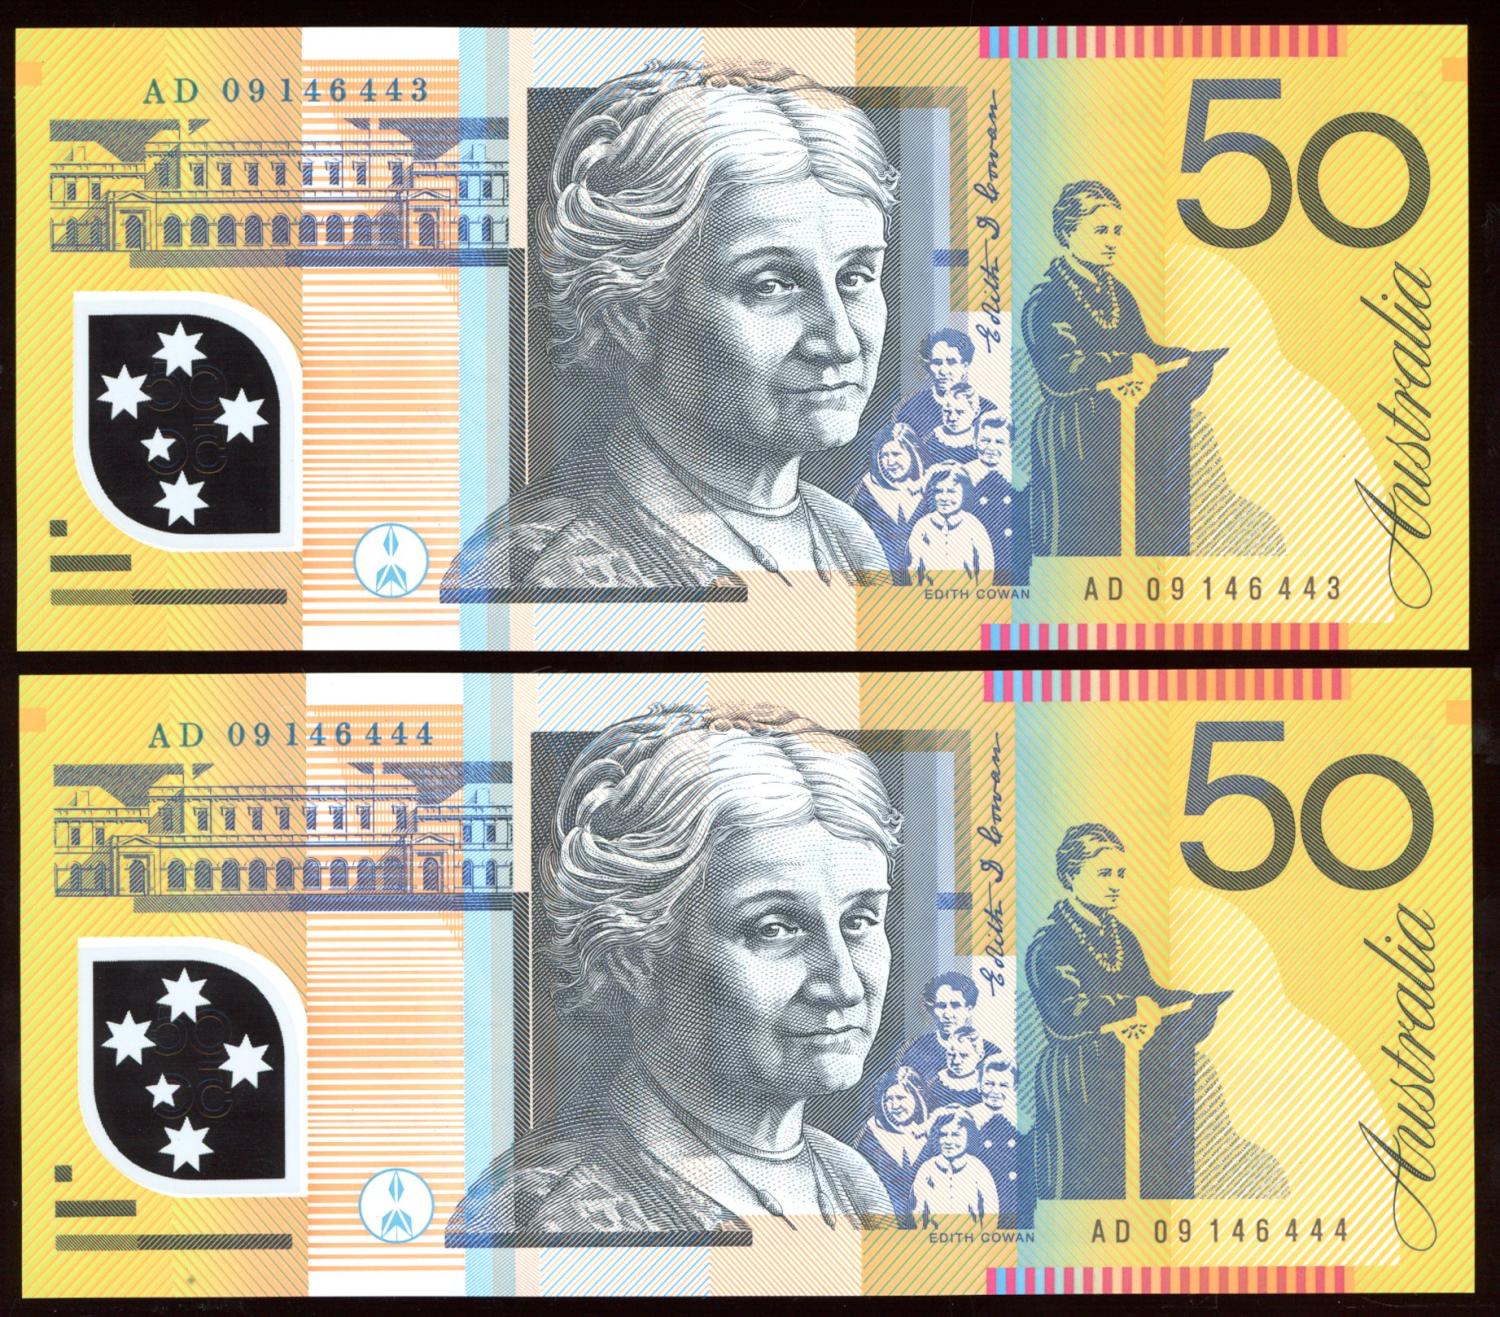 Thumbnail for 2009 Consecutive Pair $50 Polymer AD09 146443-444 UNC